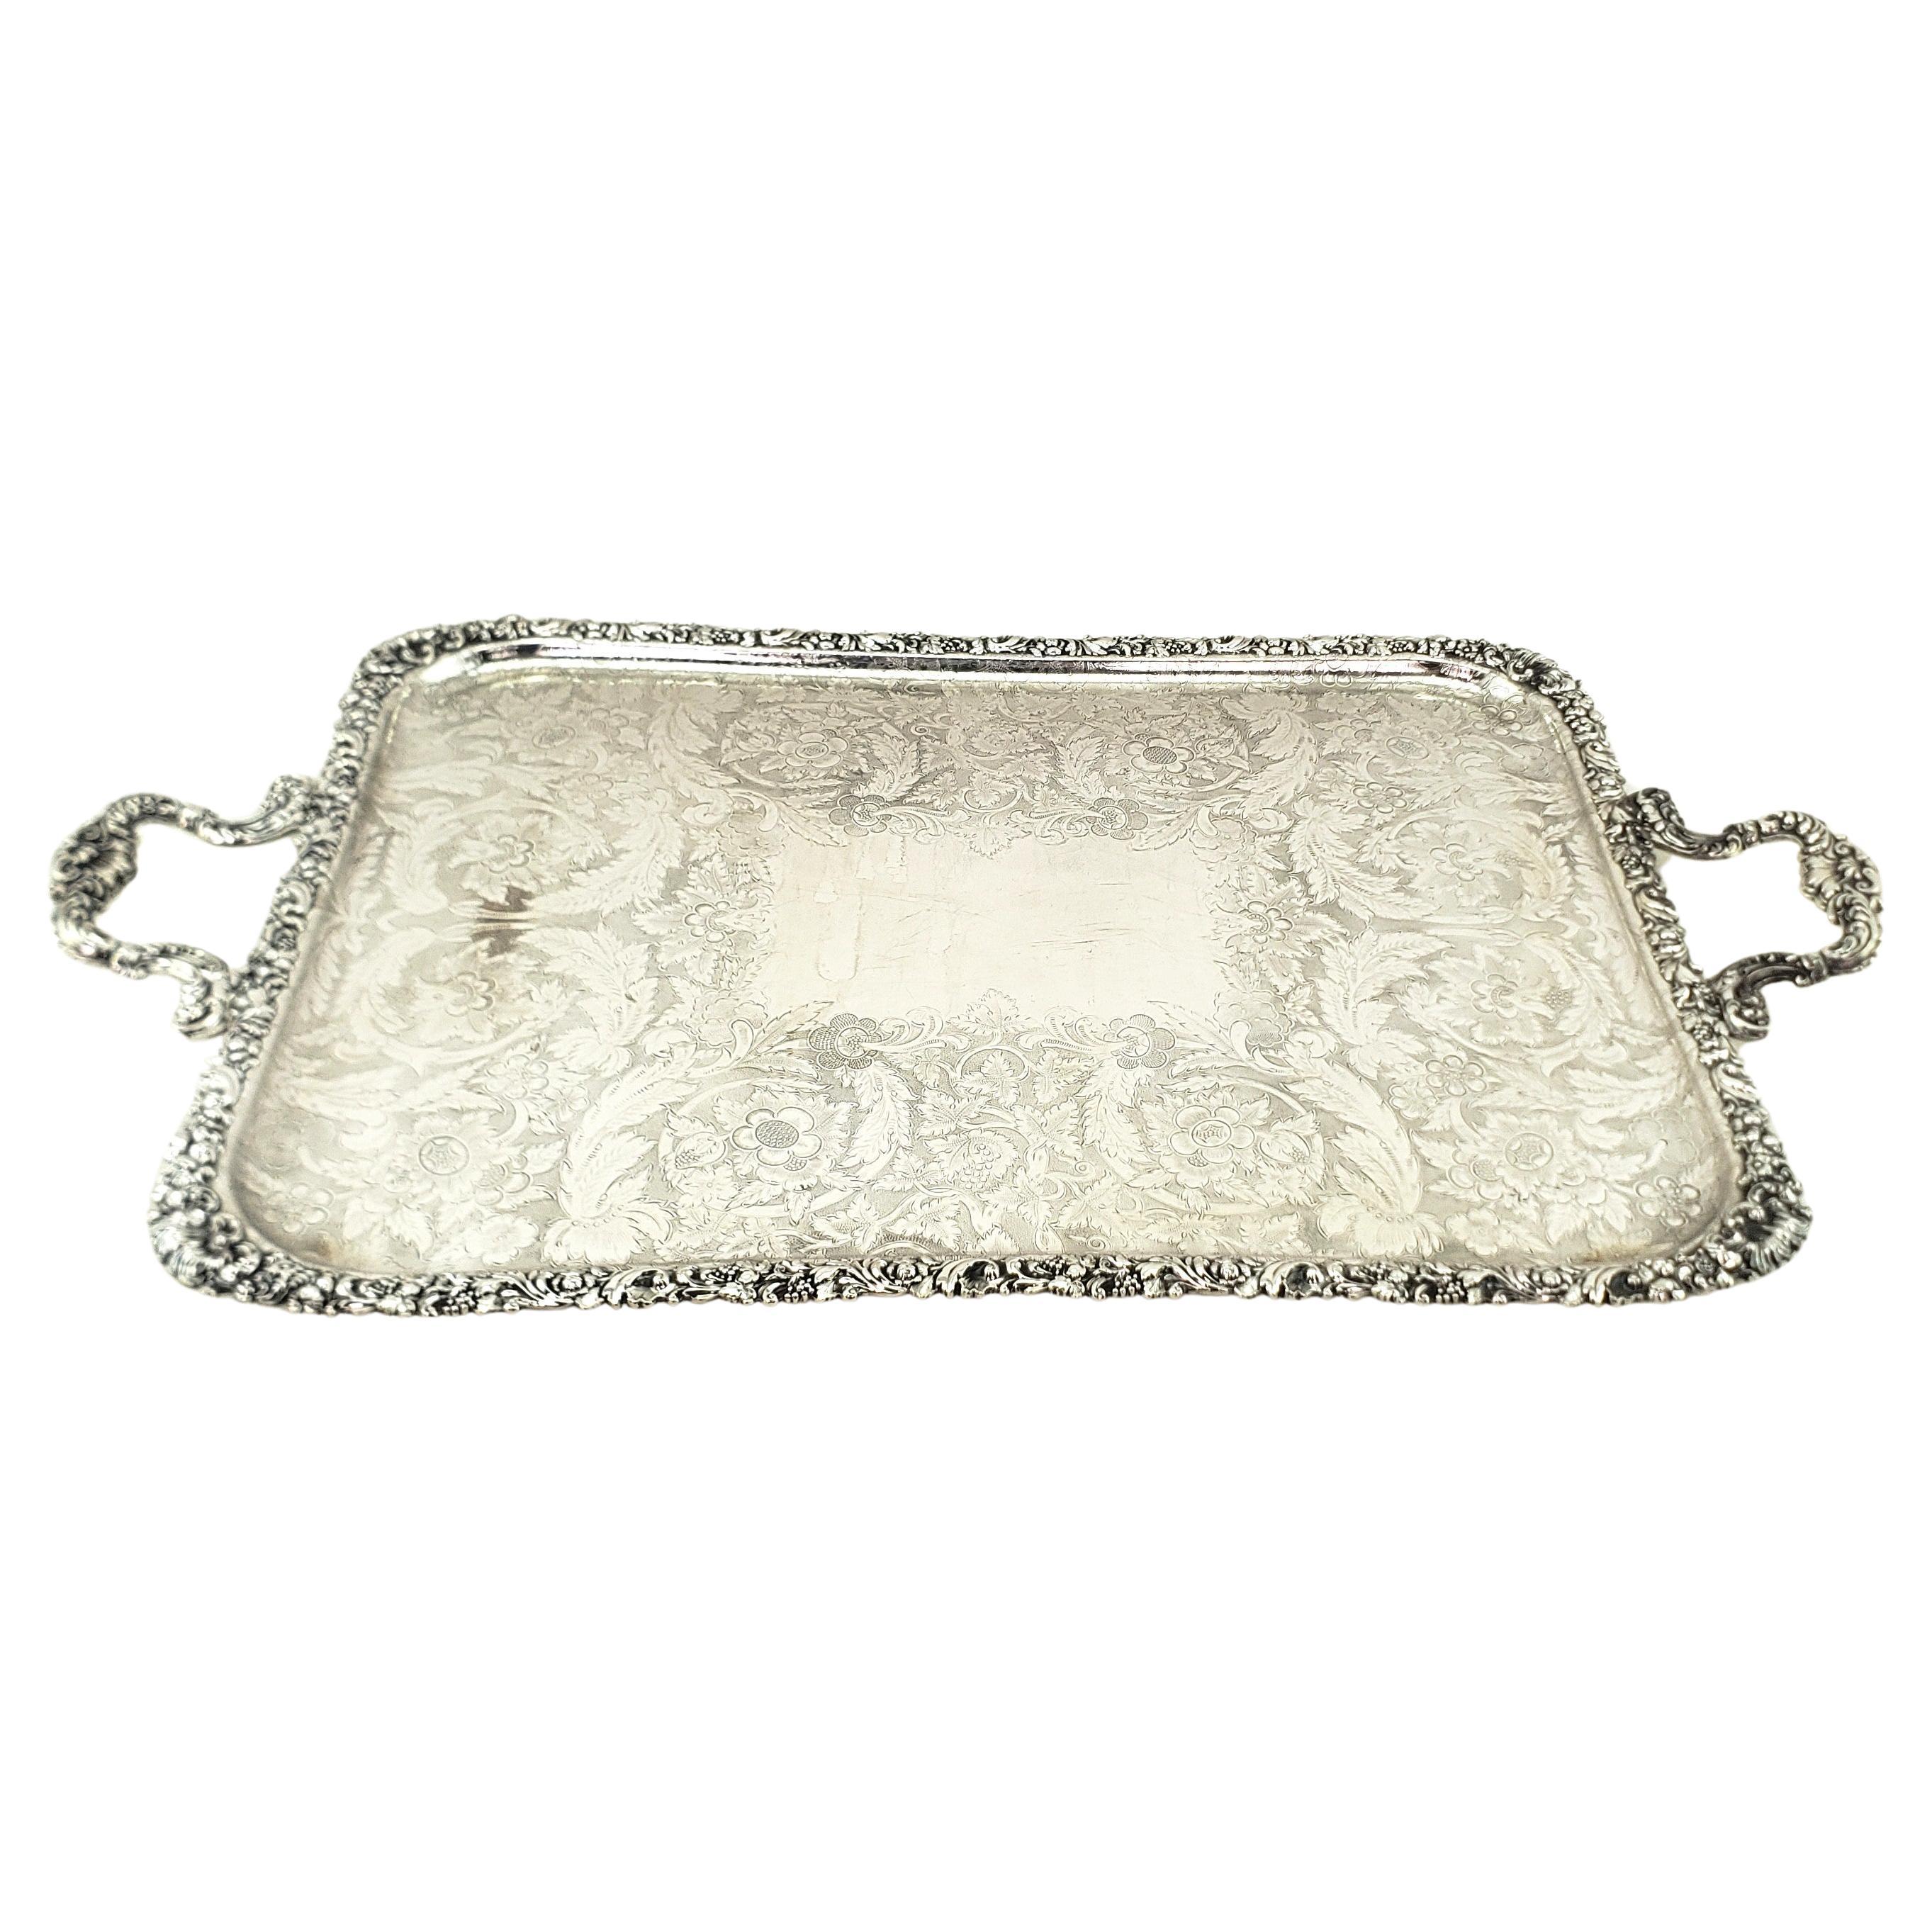 Large Antique Birks Silver Plated Serving Tray with Leaf & Berry Decoration